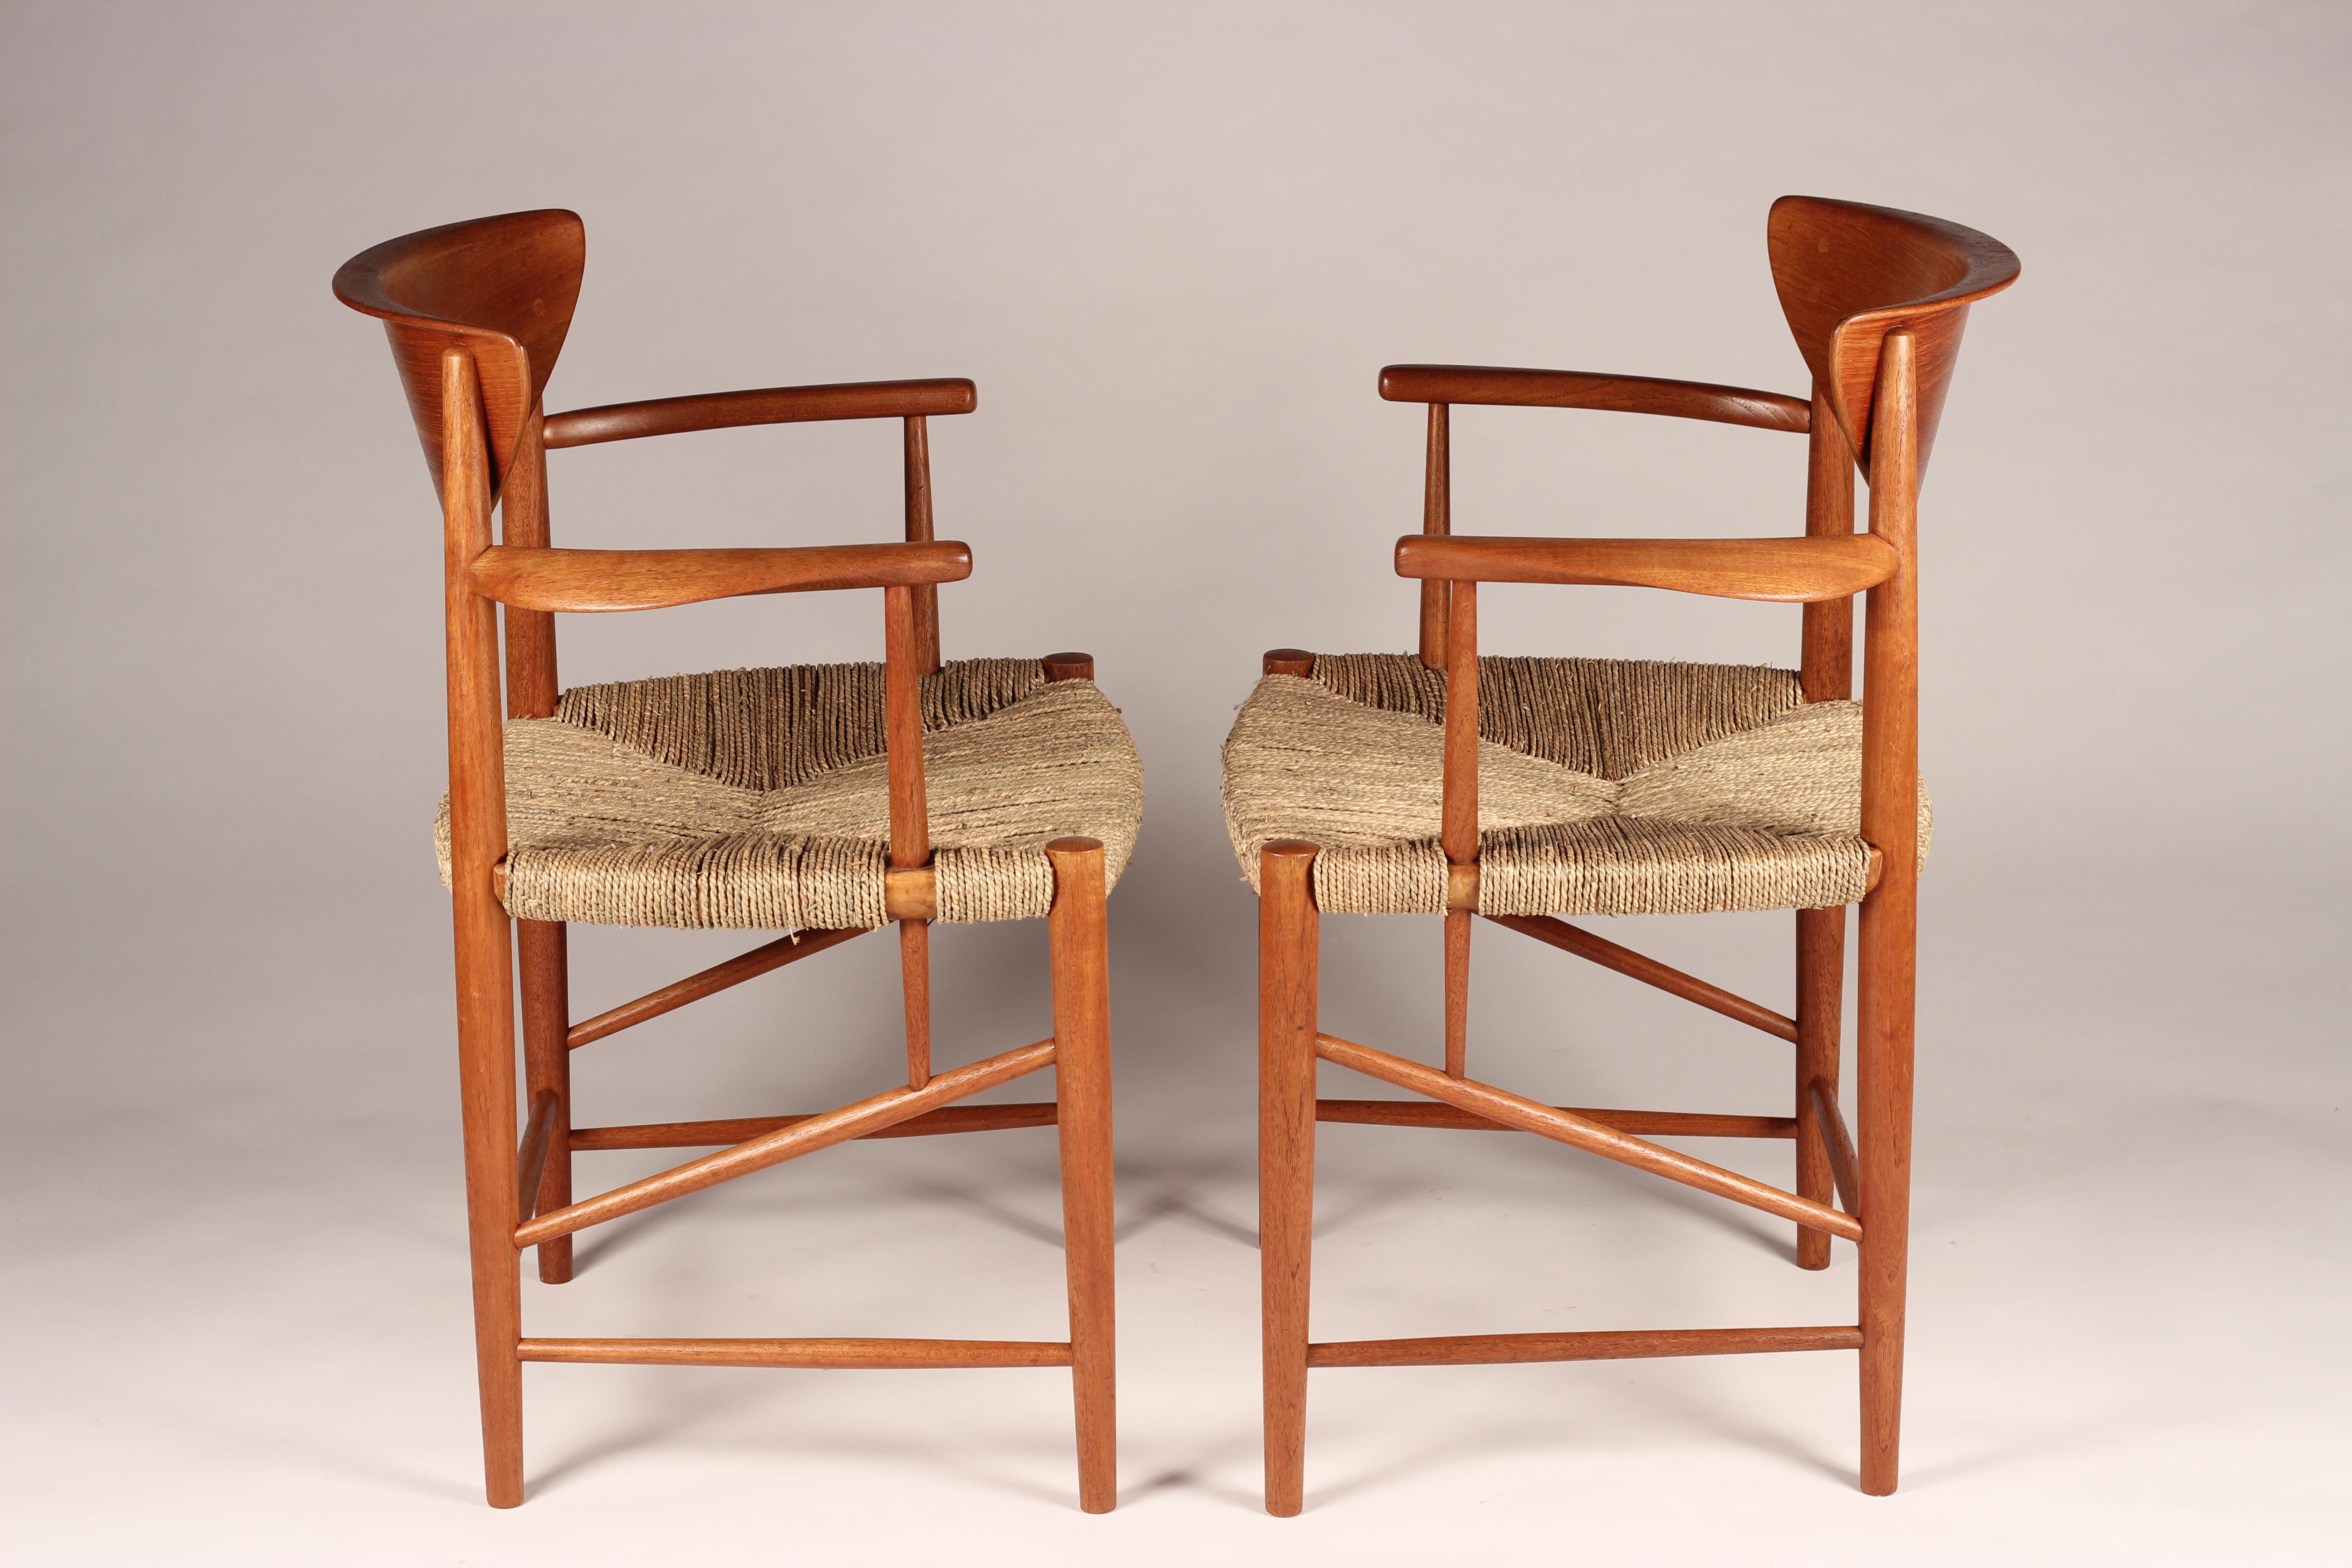 Professionally restored, refinished and recorded in sea grass. This pair of carver designed by Peter Hvidt & Orla Mølgaard Nielsen were produced by Soborg Mobler DK in the late 1950s.
Featuring beautiful sculptural arms and backs, these pair of